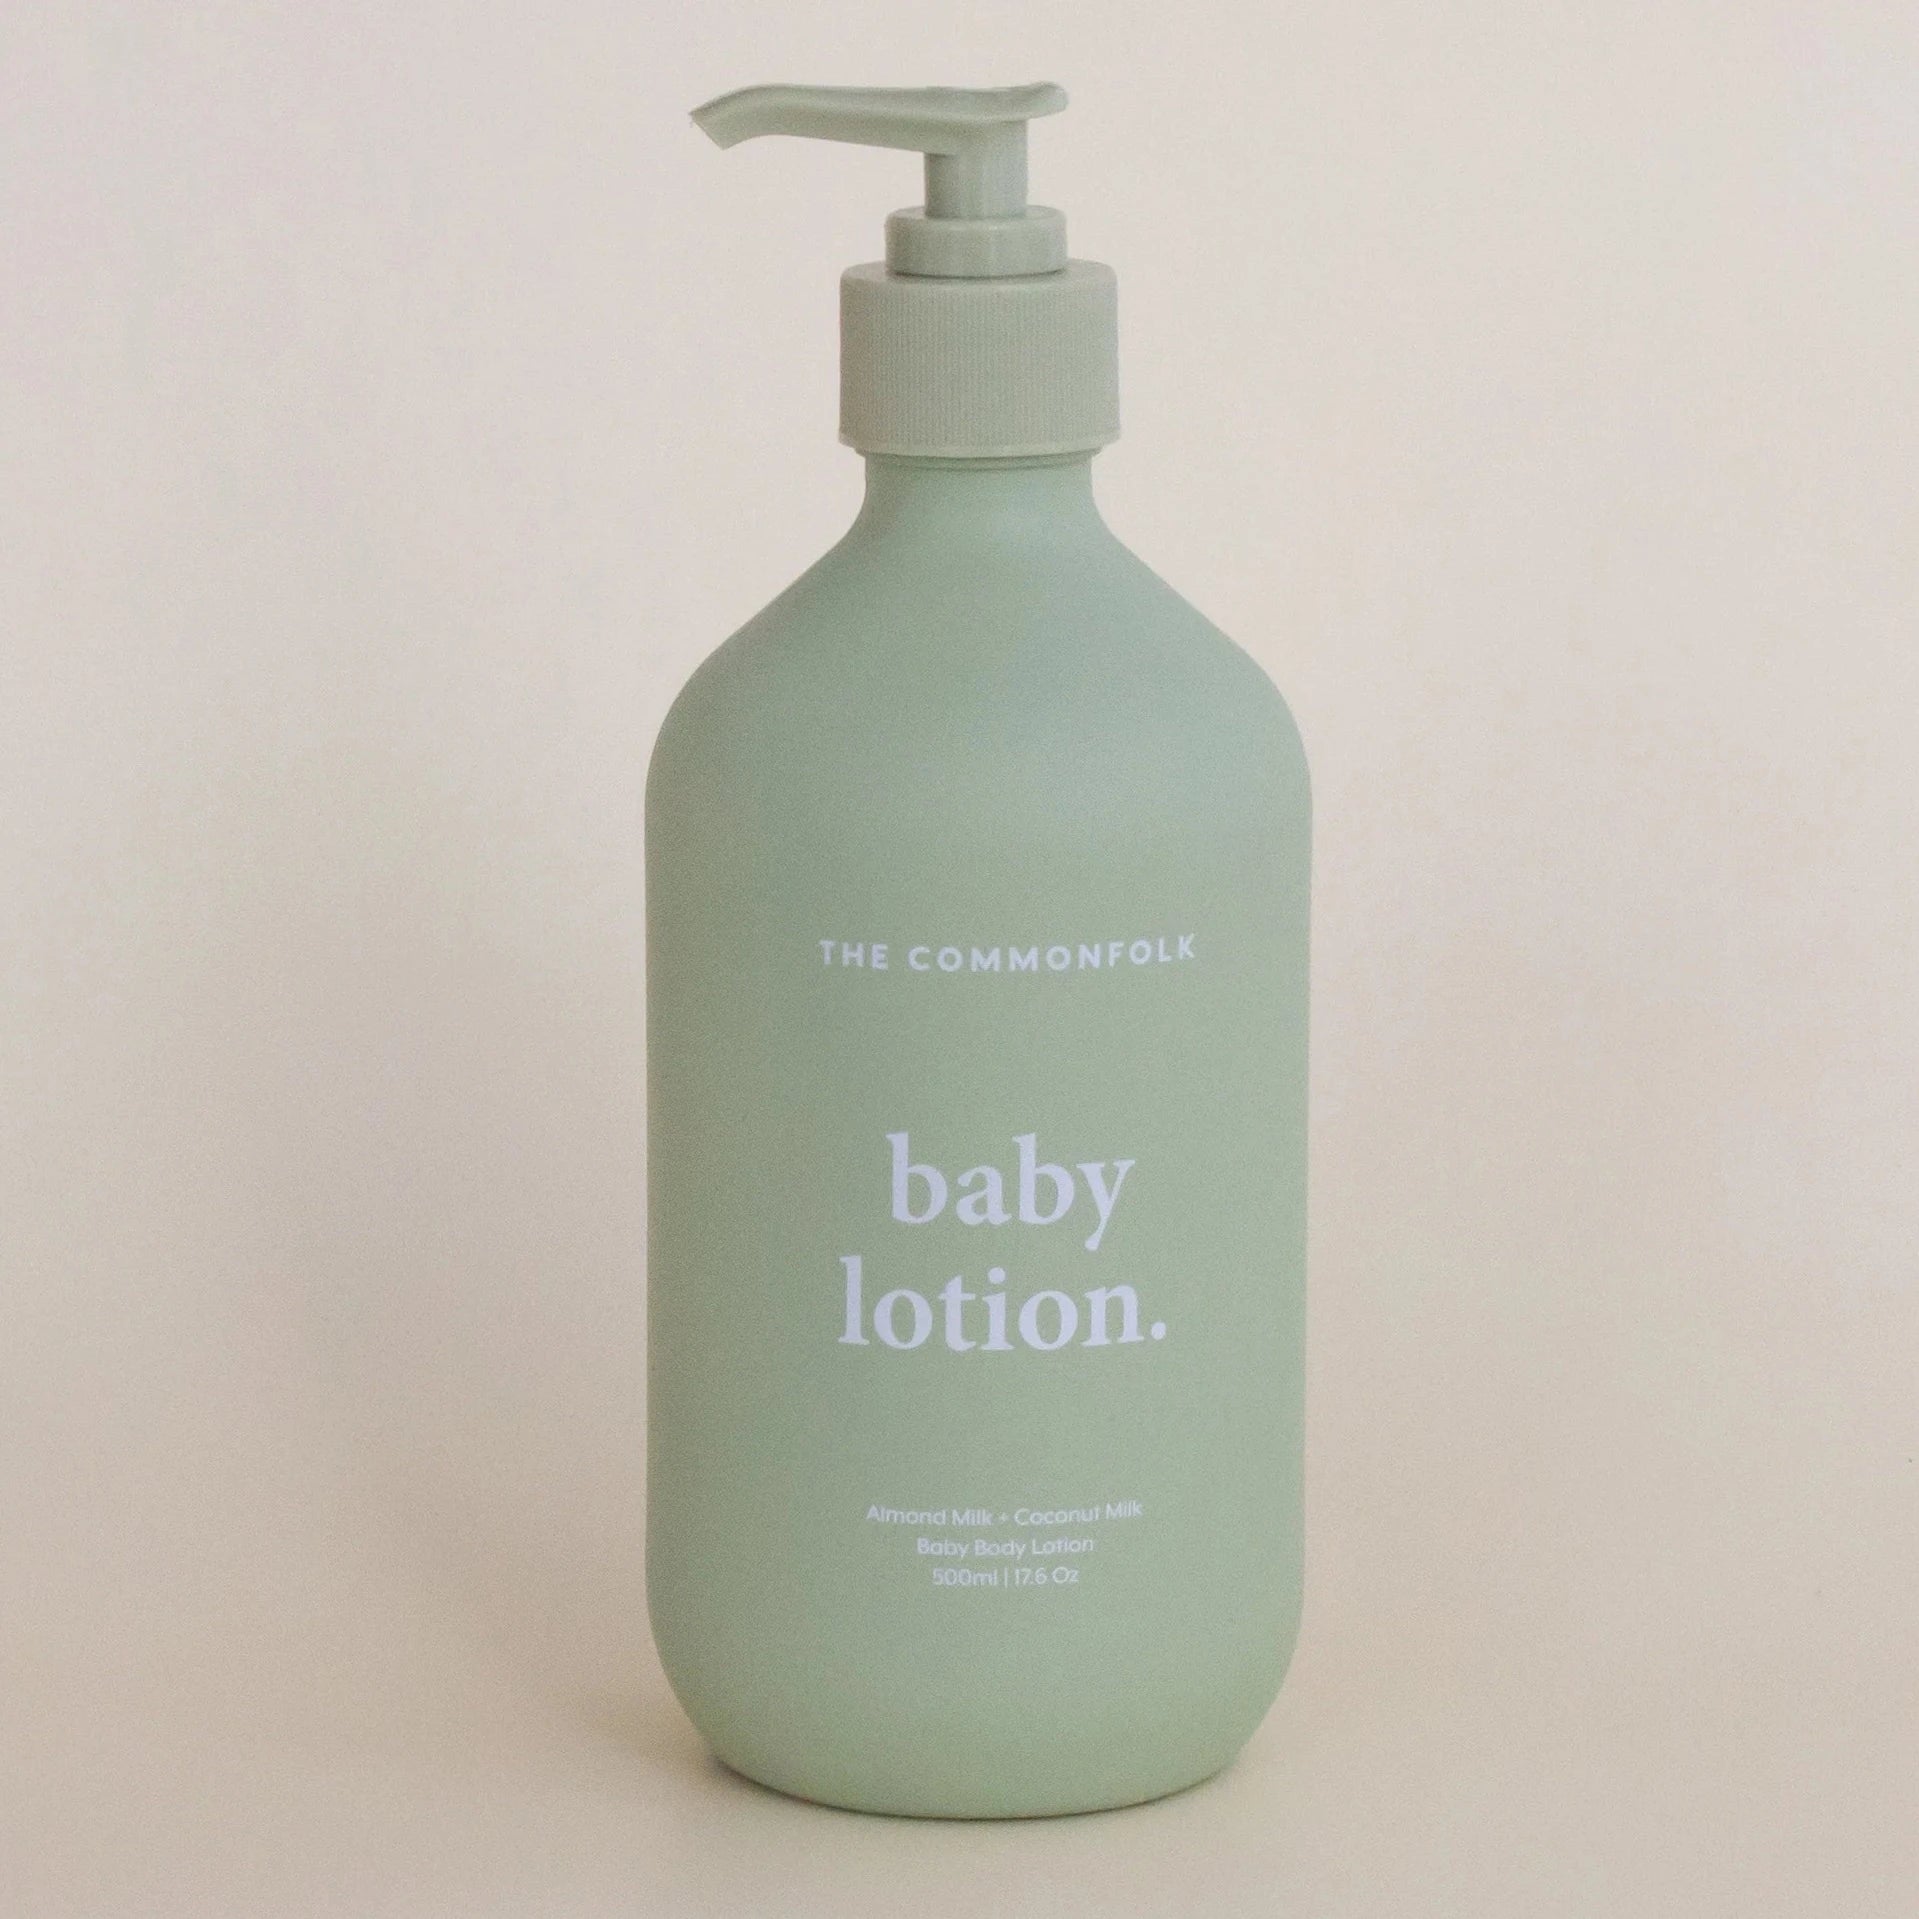 Sage green baby lotion bottle